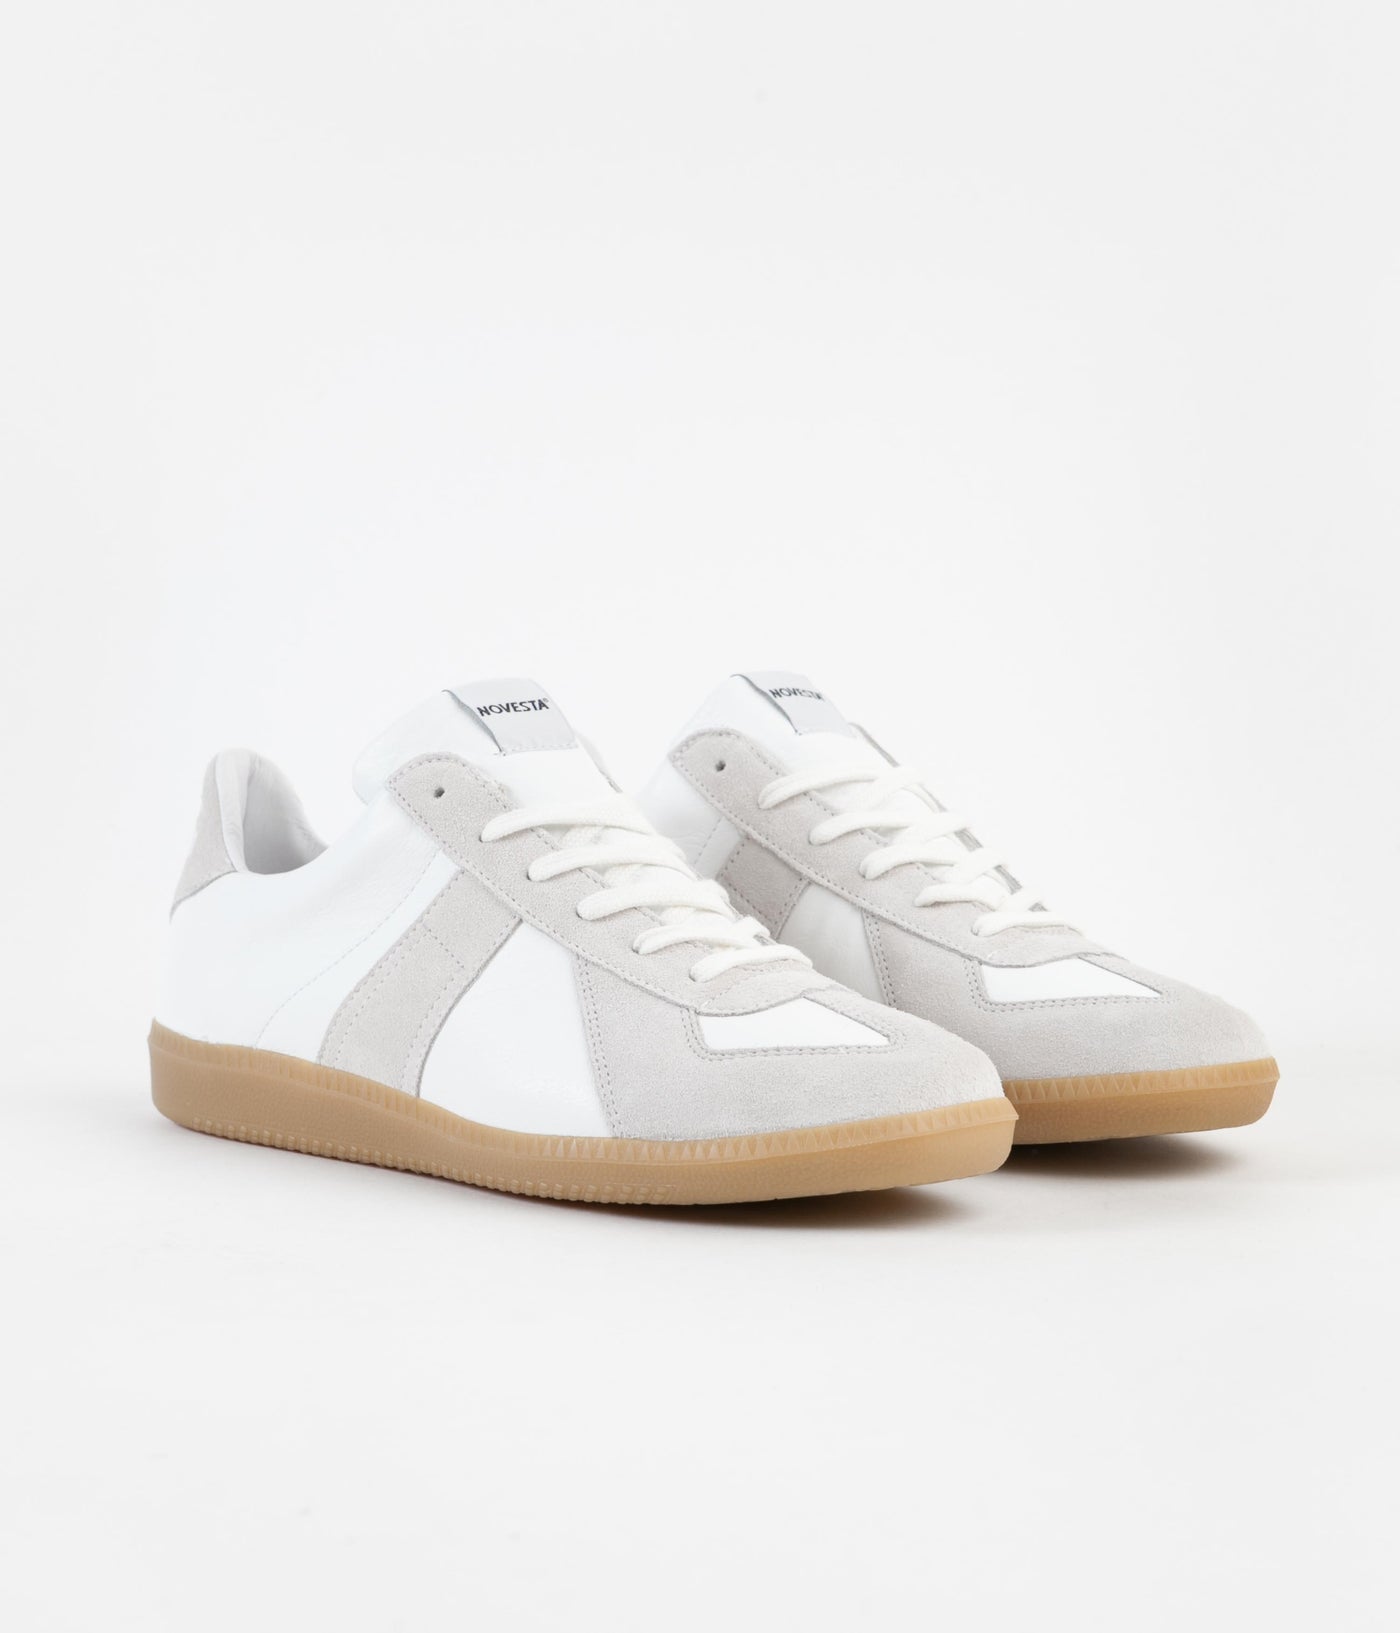 Novesta All Leather German Army Trainer Shoes - White / 003 Transparen ...